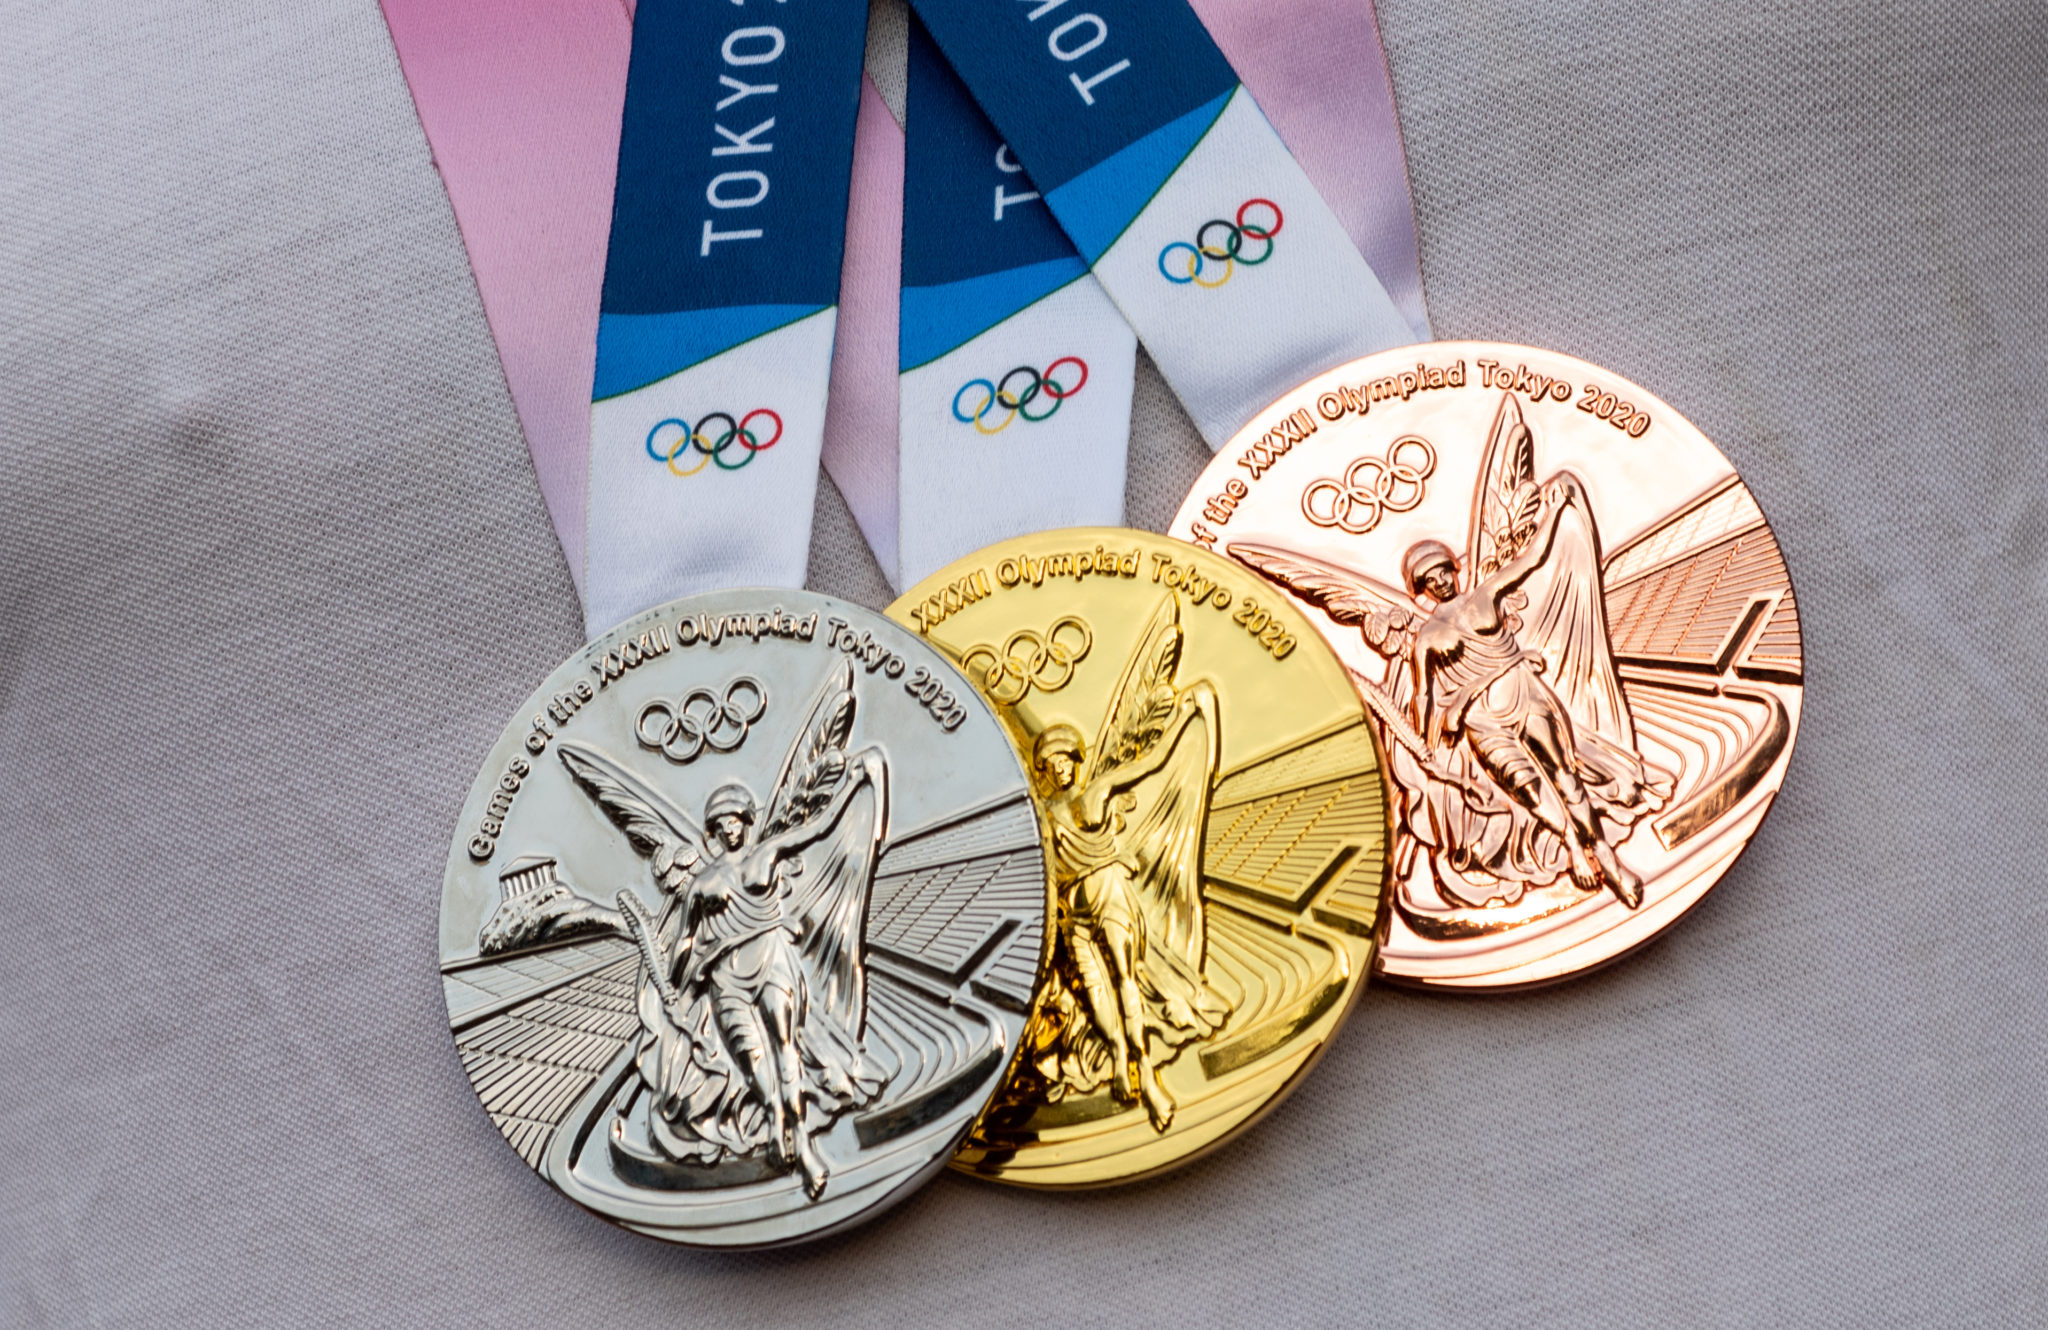 Olympic Medals 2048x1330 